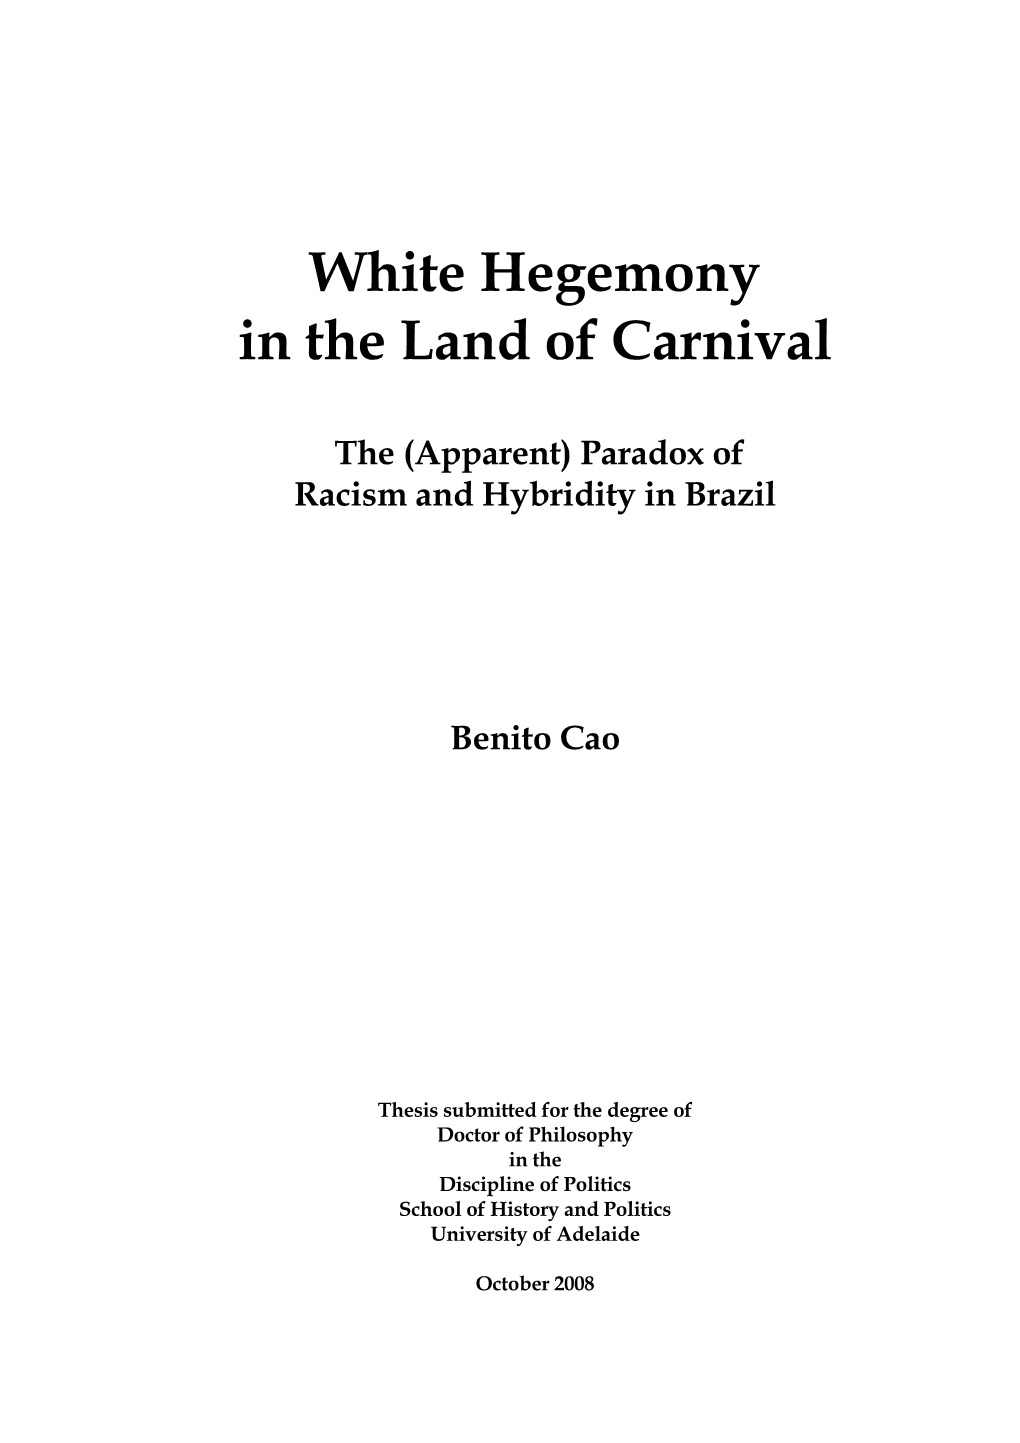 White Hegemony in the Land of Carnival